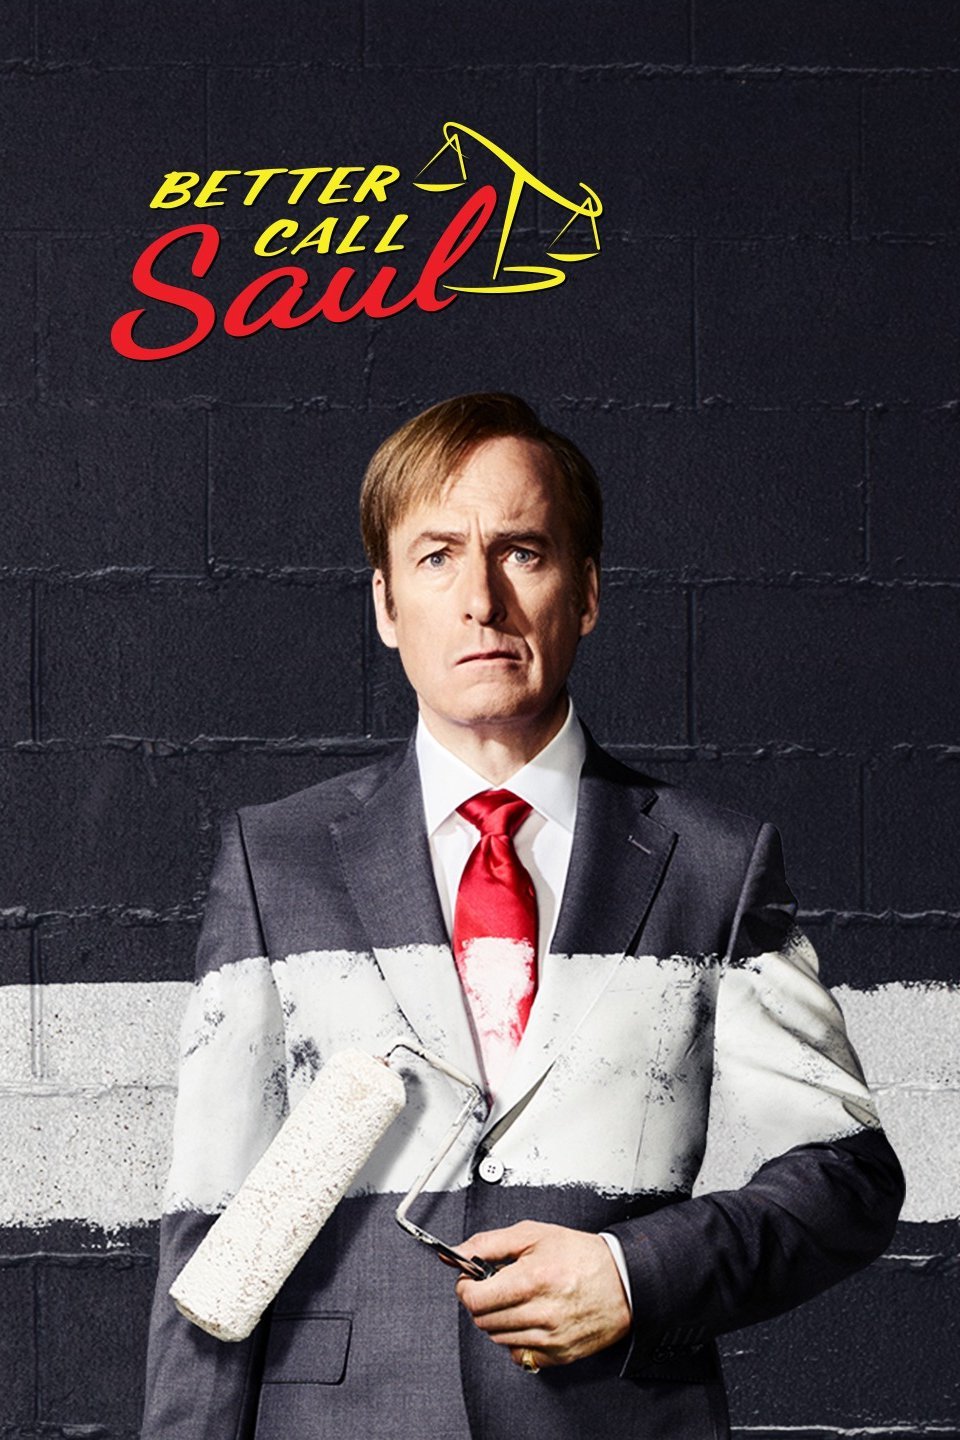 Better Call Saul continues to spend your love so much in every season